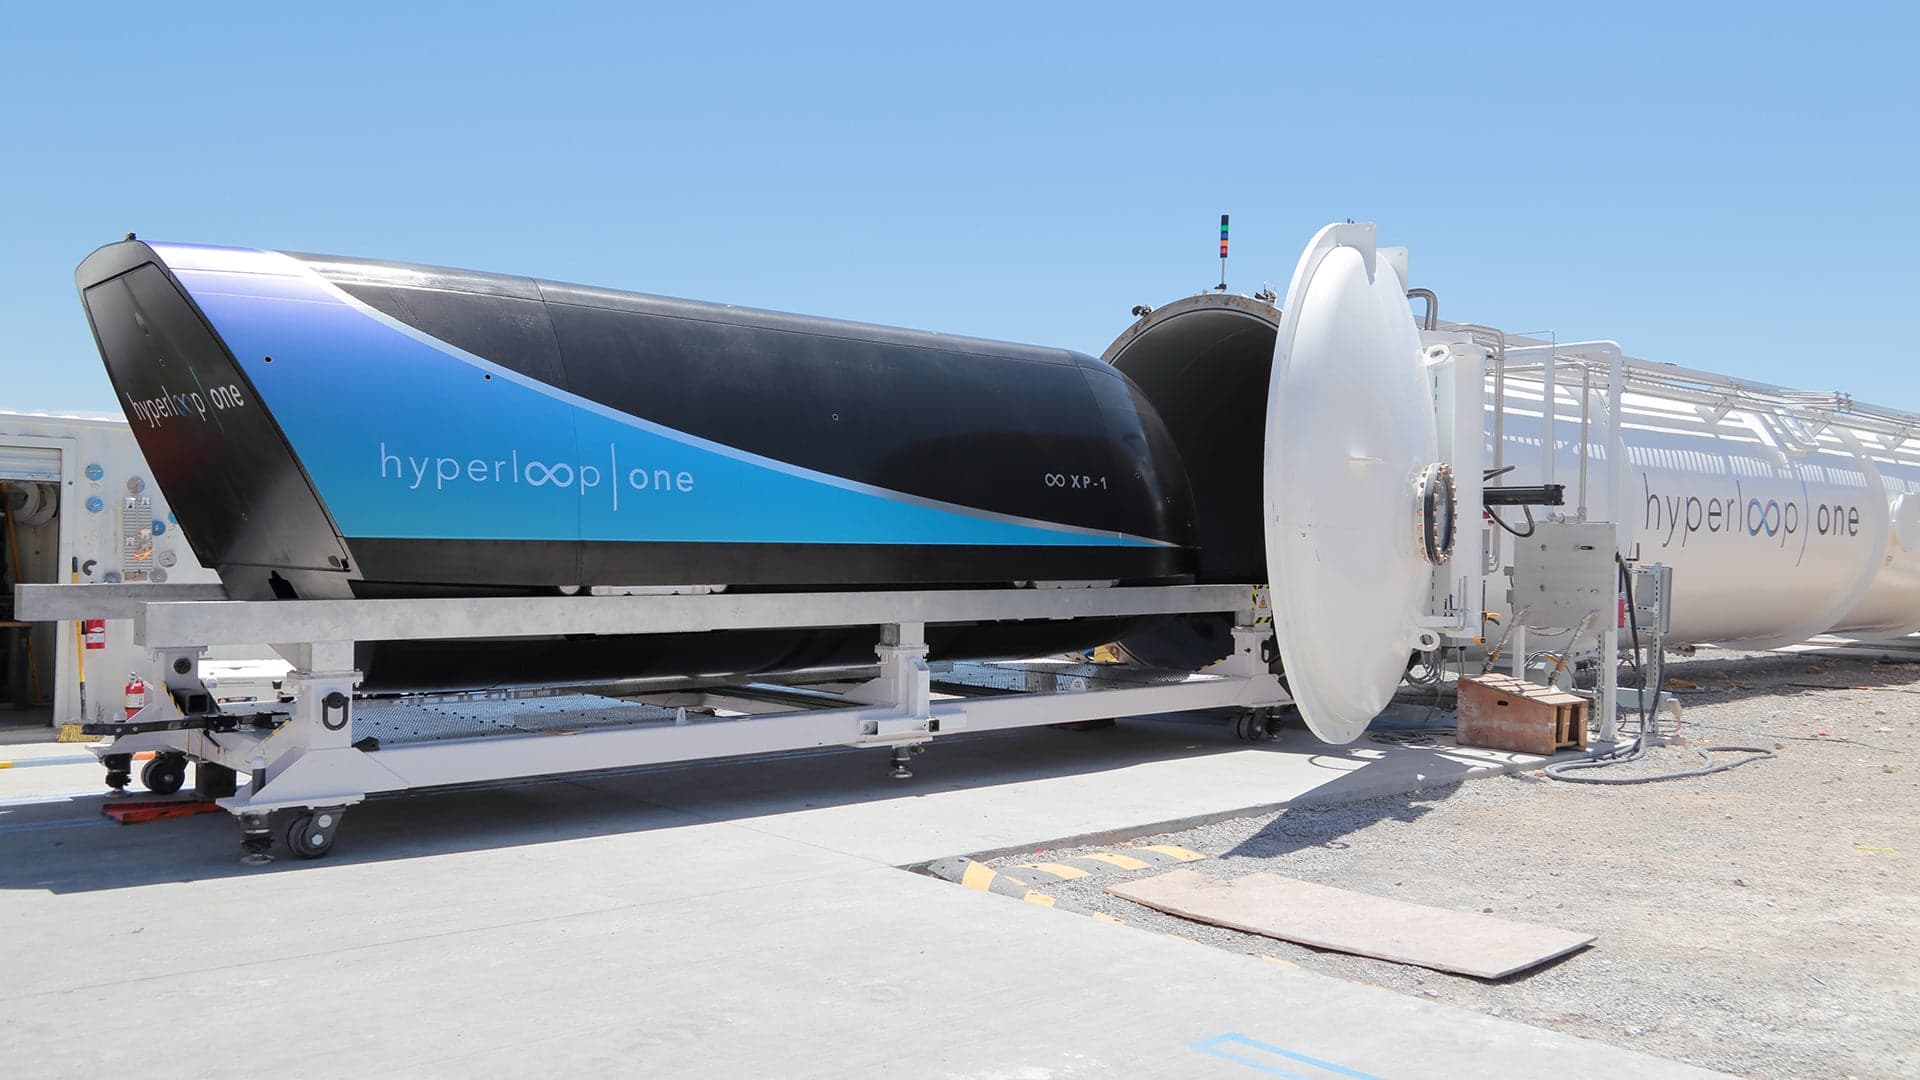 Musk’s ‘Verbal Govt Approval’ of Hyperloop Project Wasn’t Exactly Official